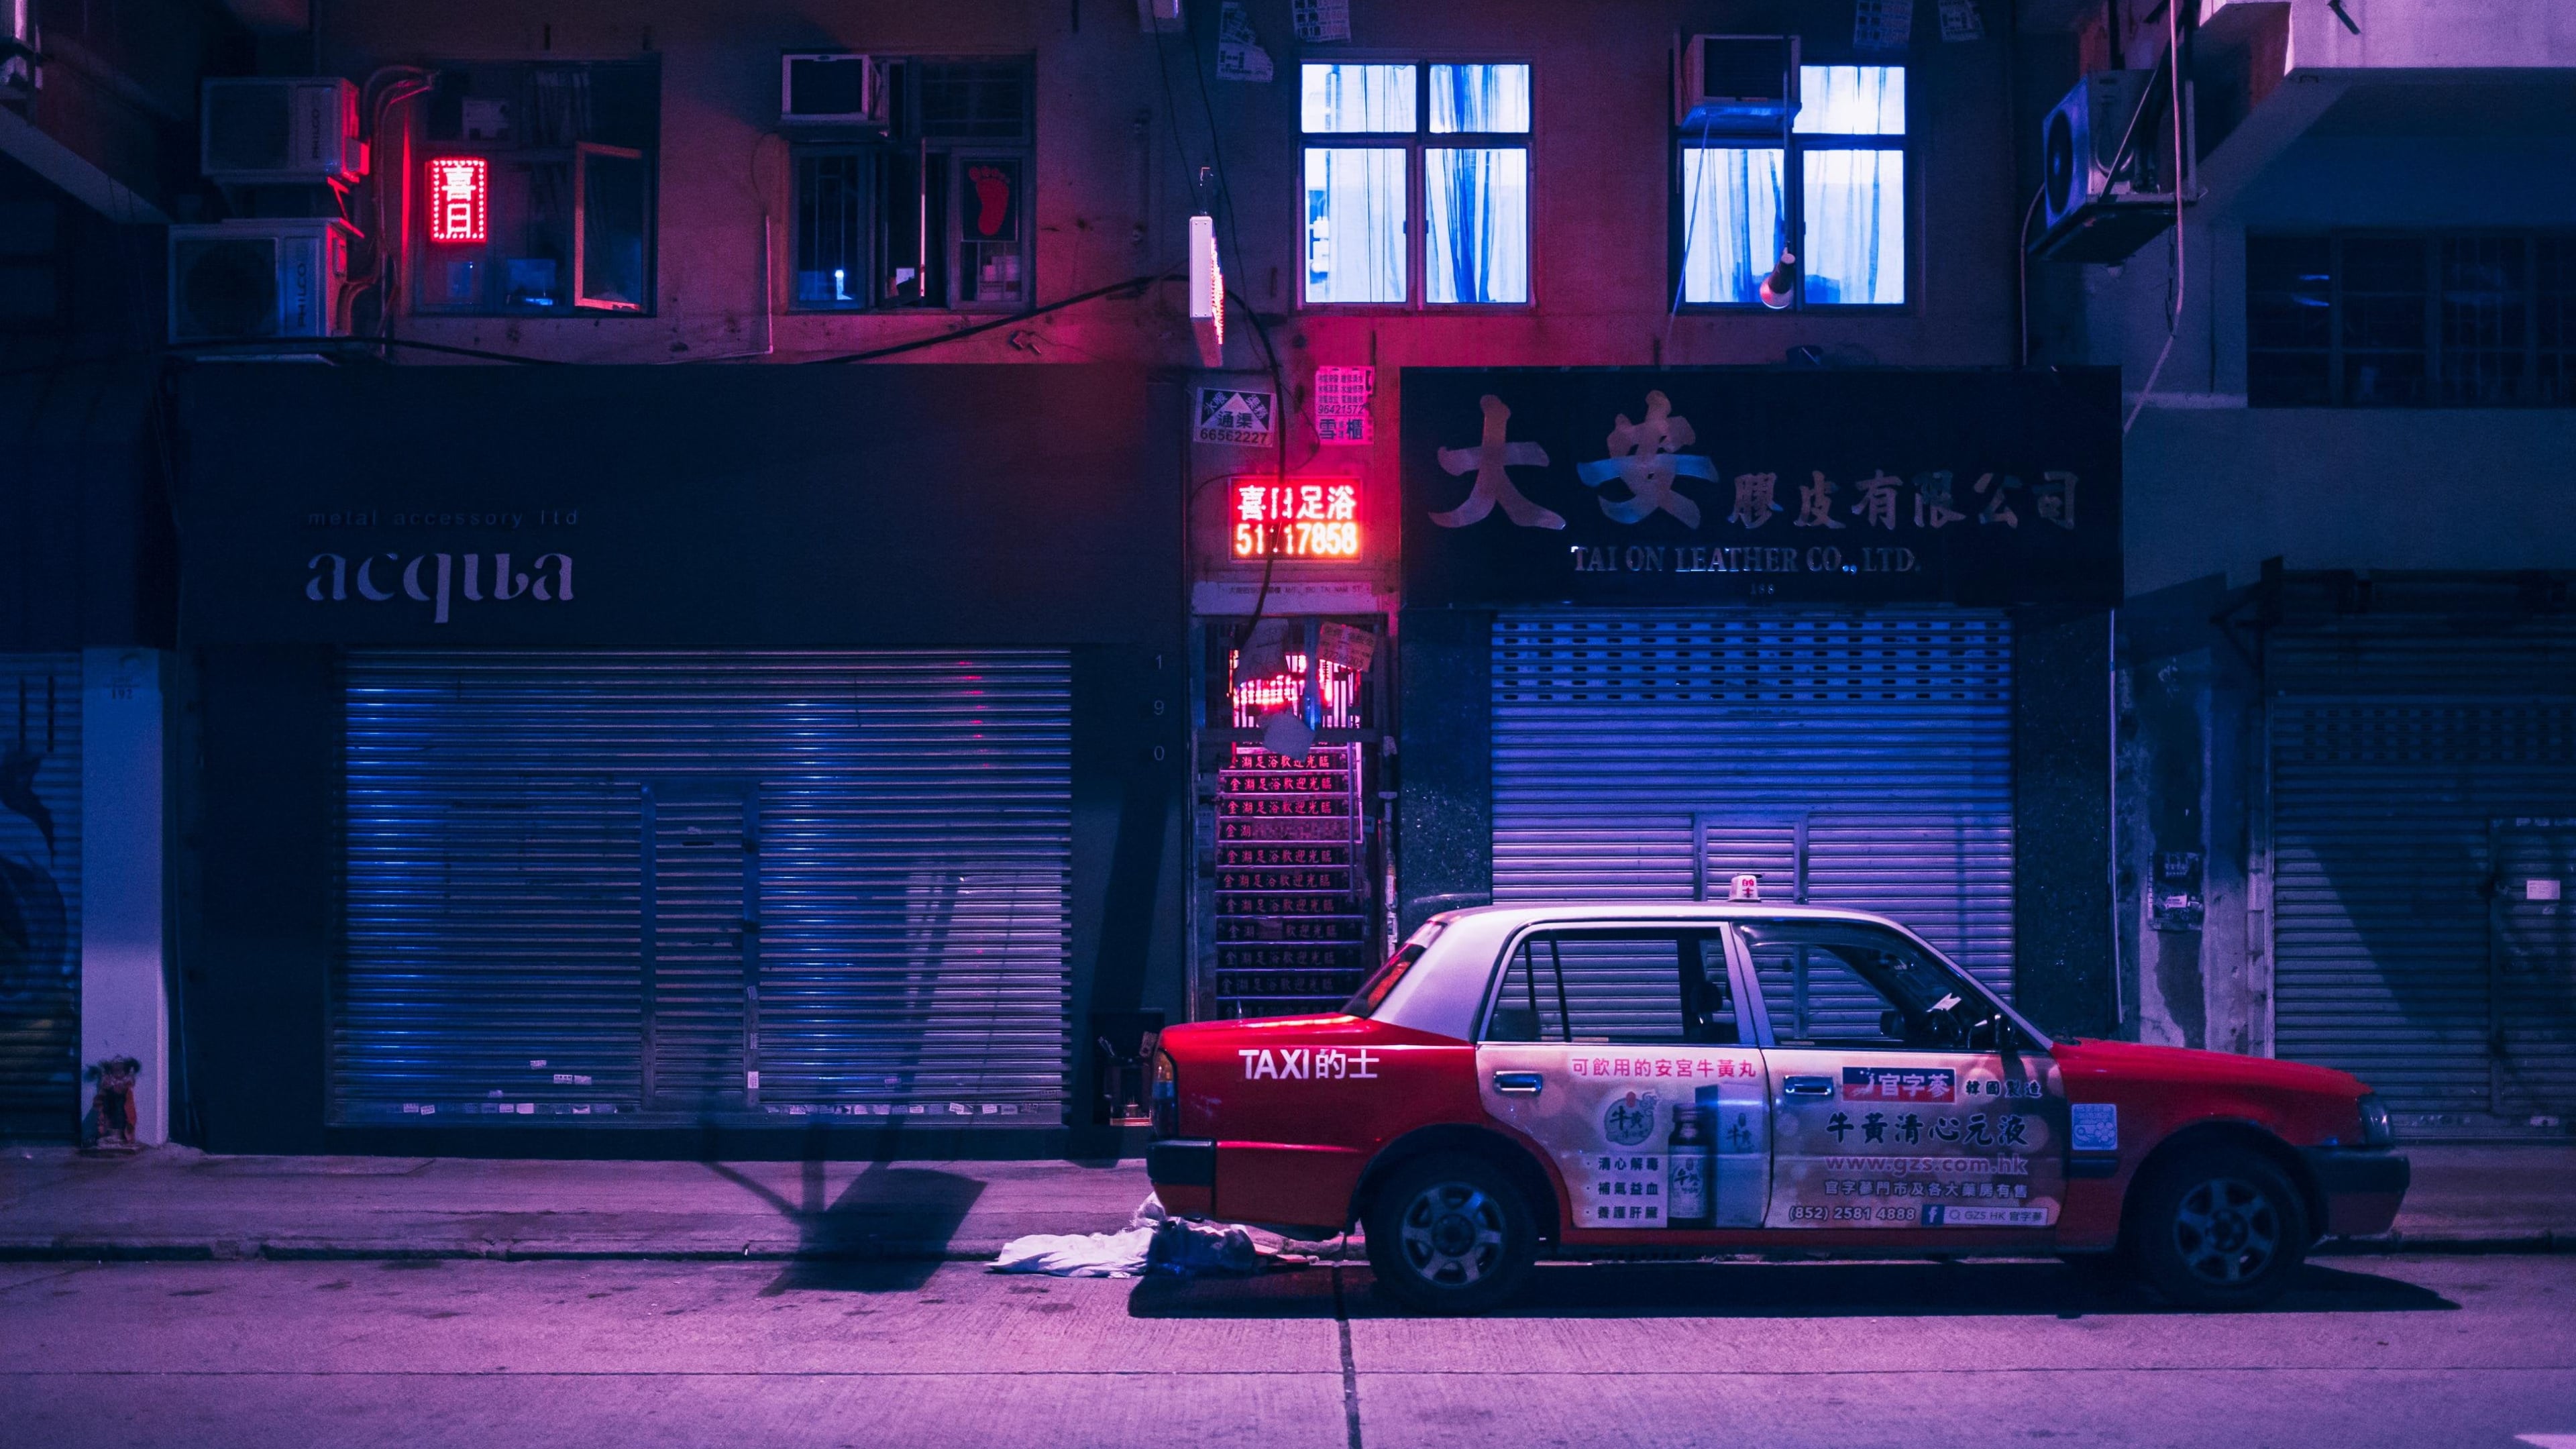 Chinese taxi. [3840x2160]